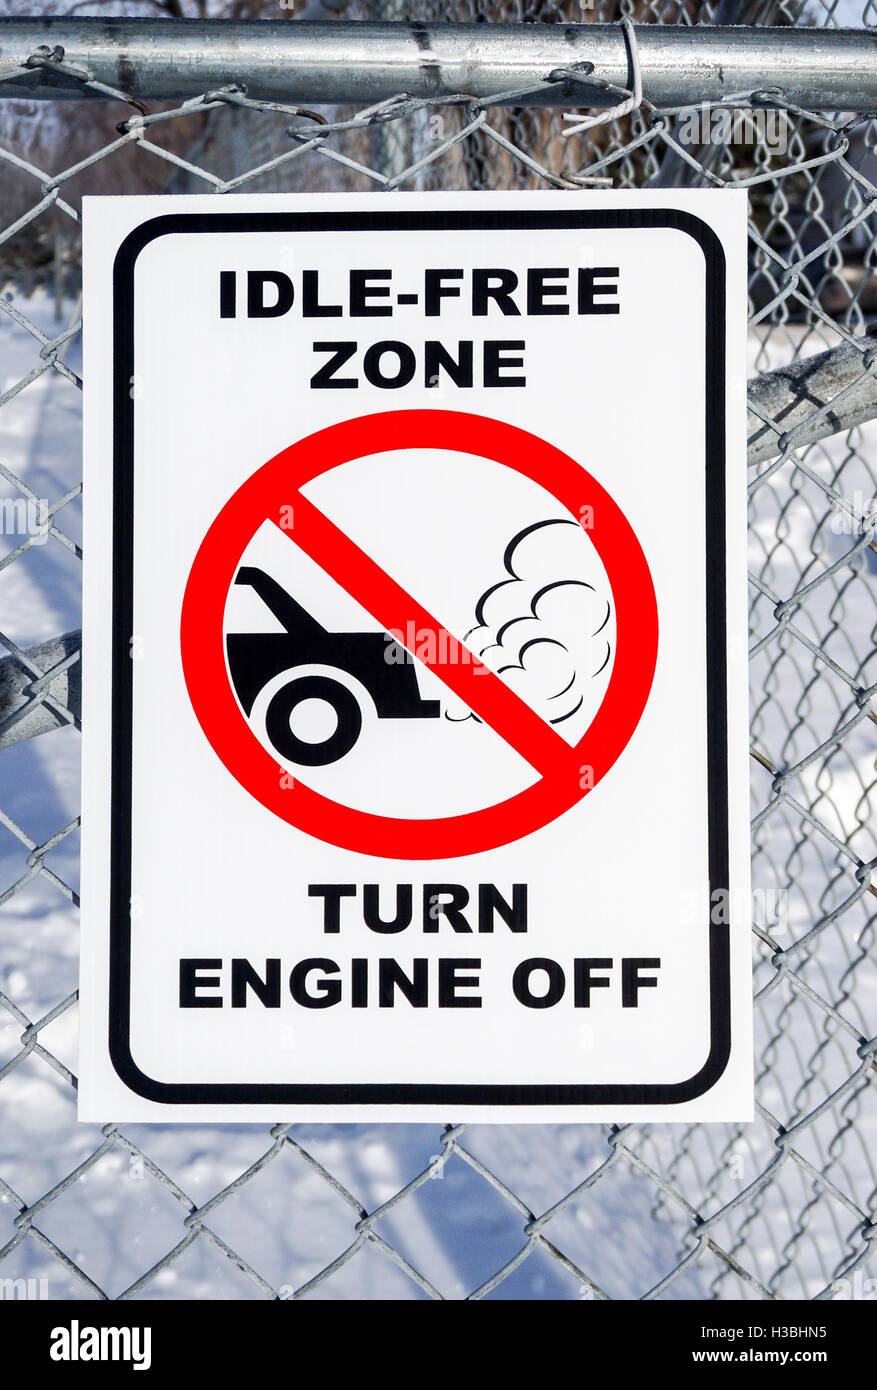 Idle-Free Zone, Turn Engine Off Sign on a Fence Stock Photo